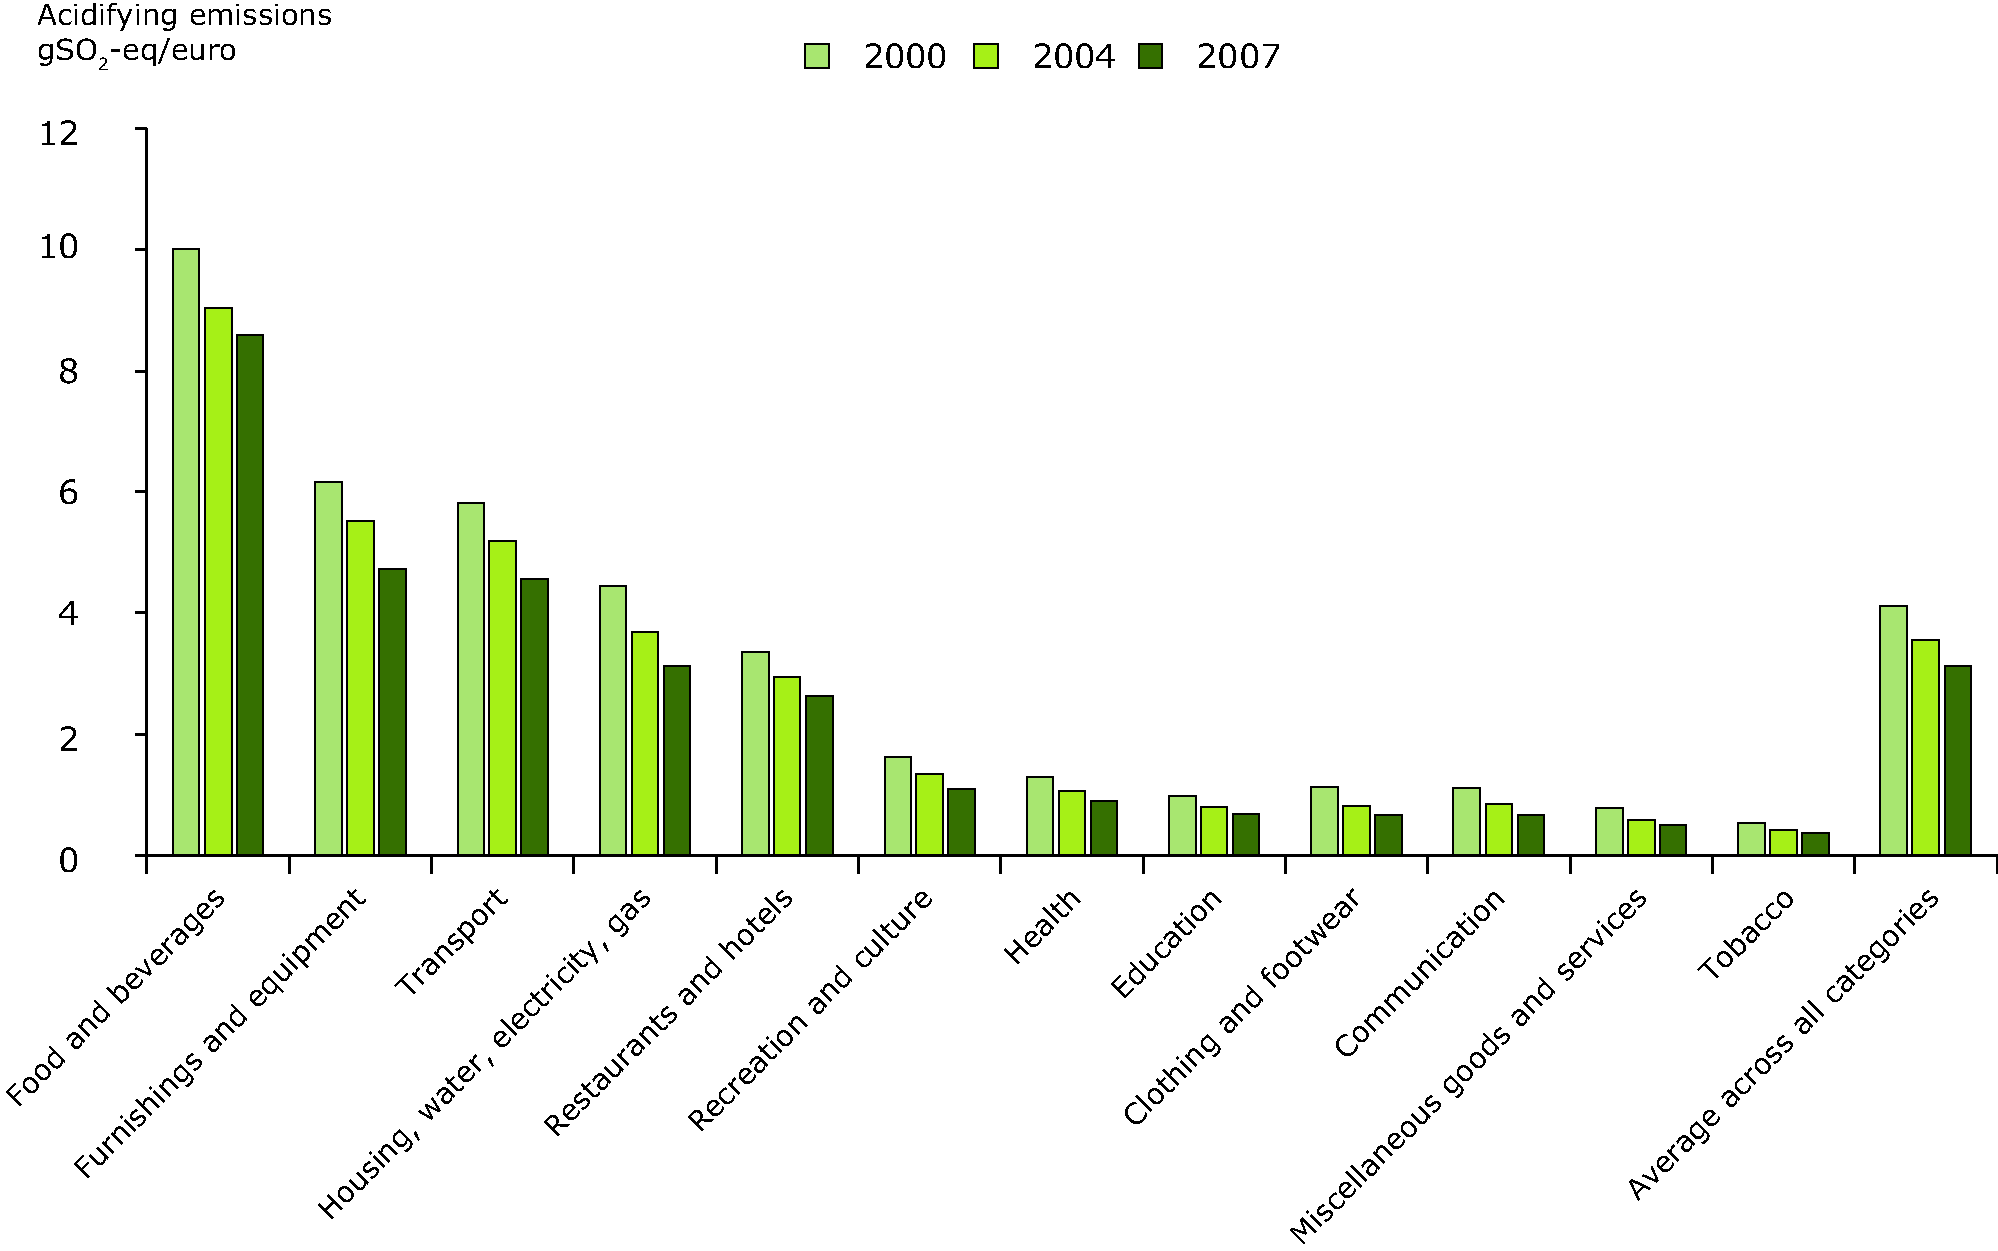 Acidifying emissions induced by household consumption, per Euro spent of expenditure in 12 household consumption categories, 2000-2007